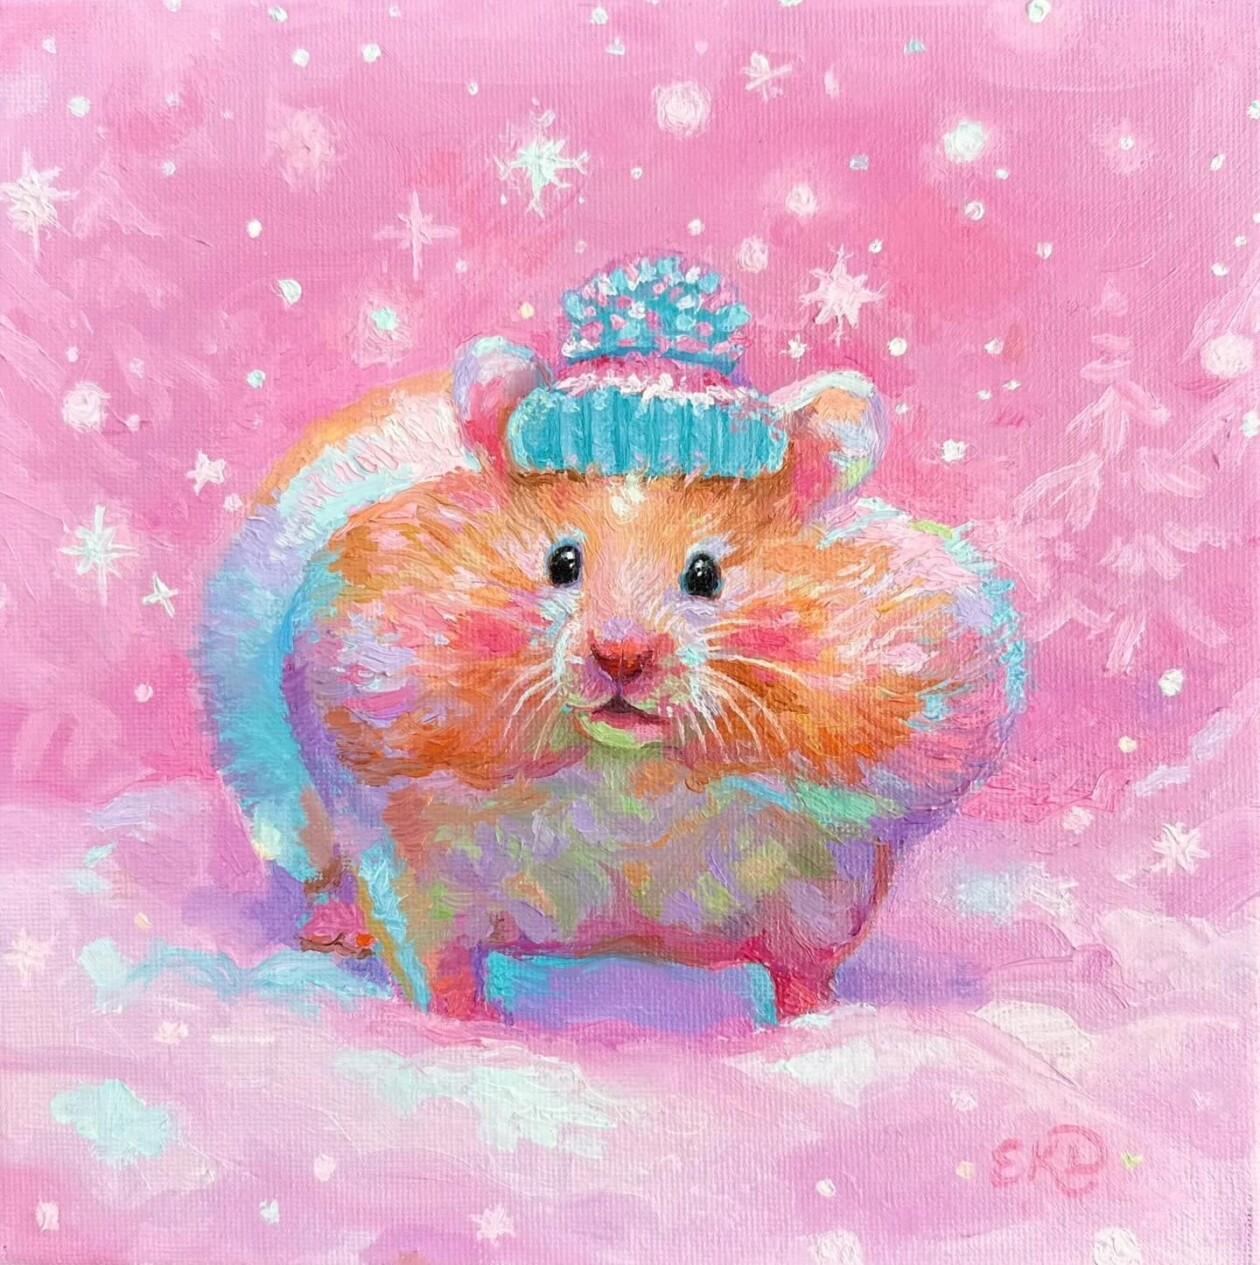 Cute And Lovely Oil And Acrylic Paintings Of Animals By Emily Dunlap (13)